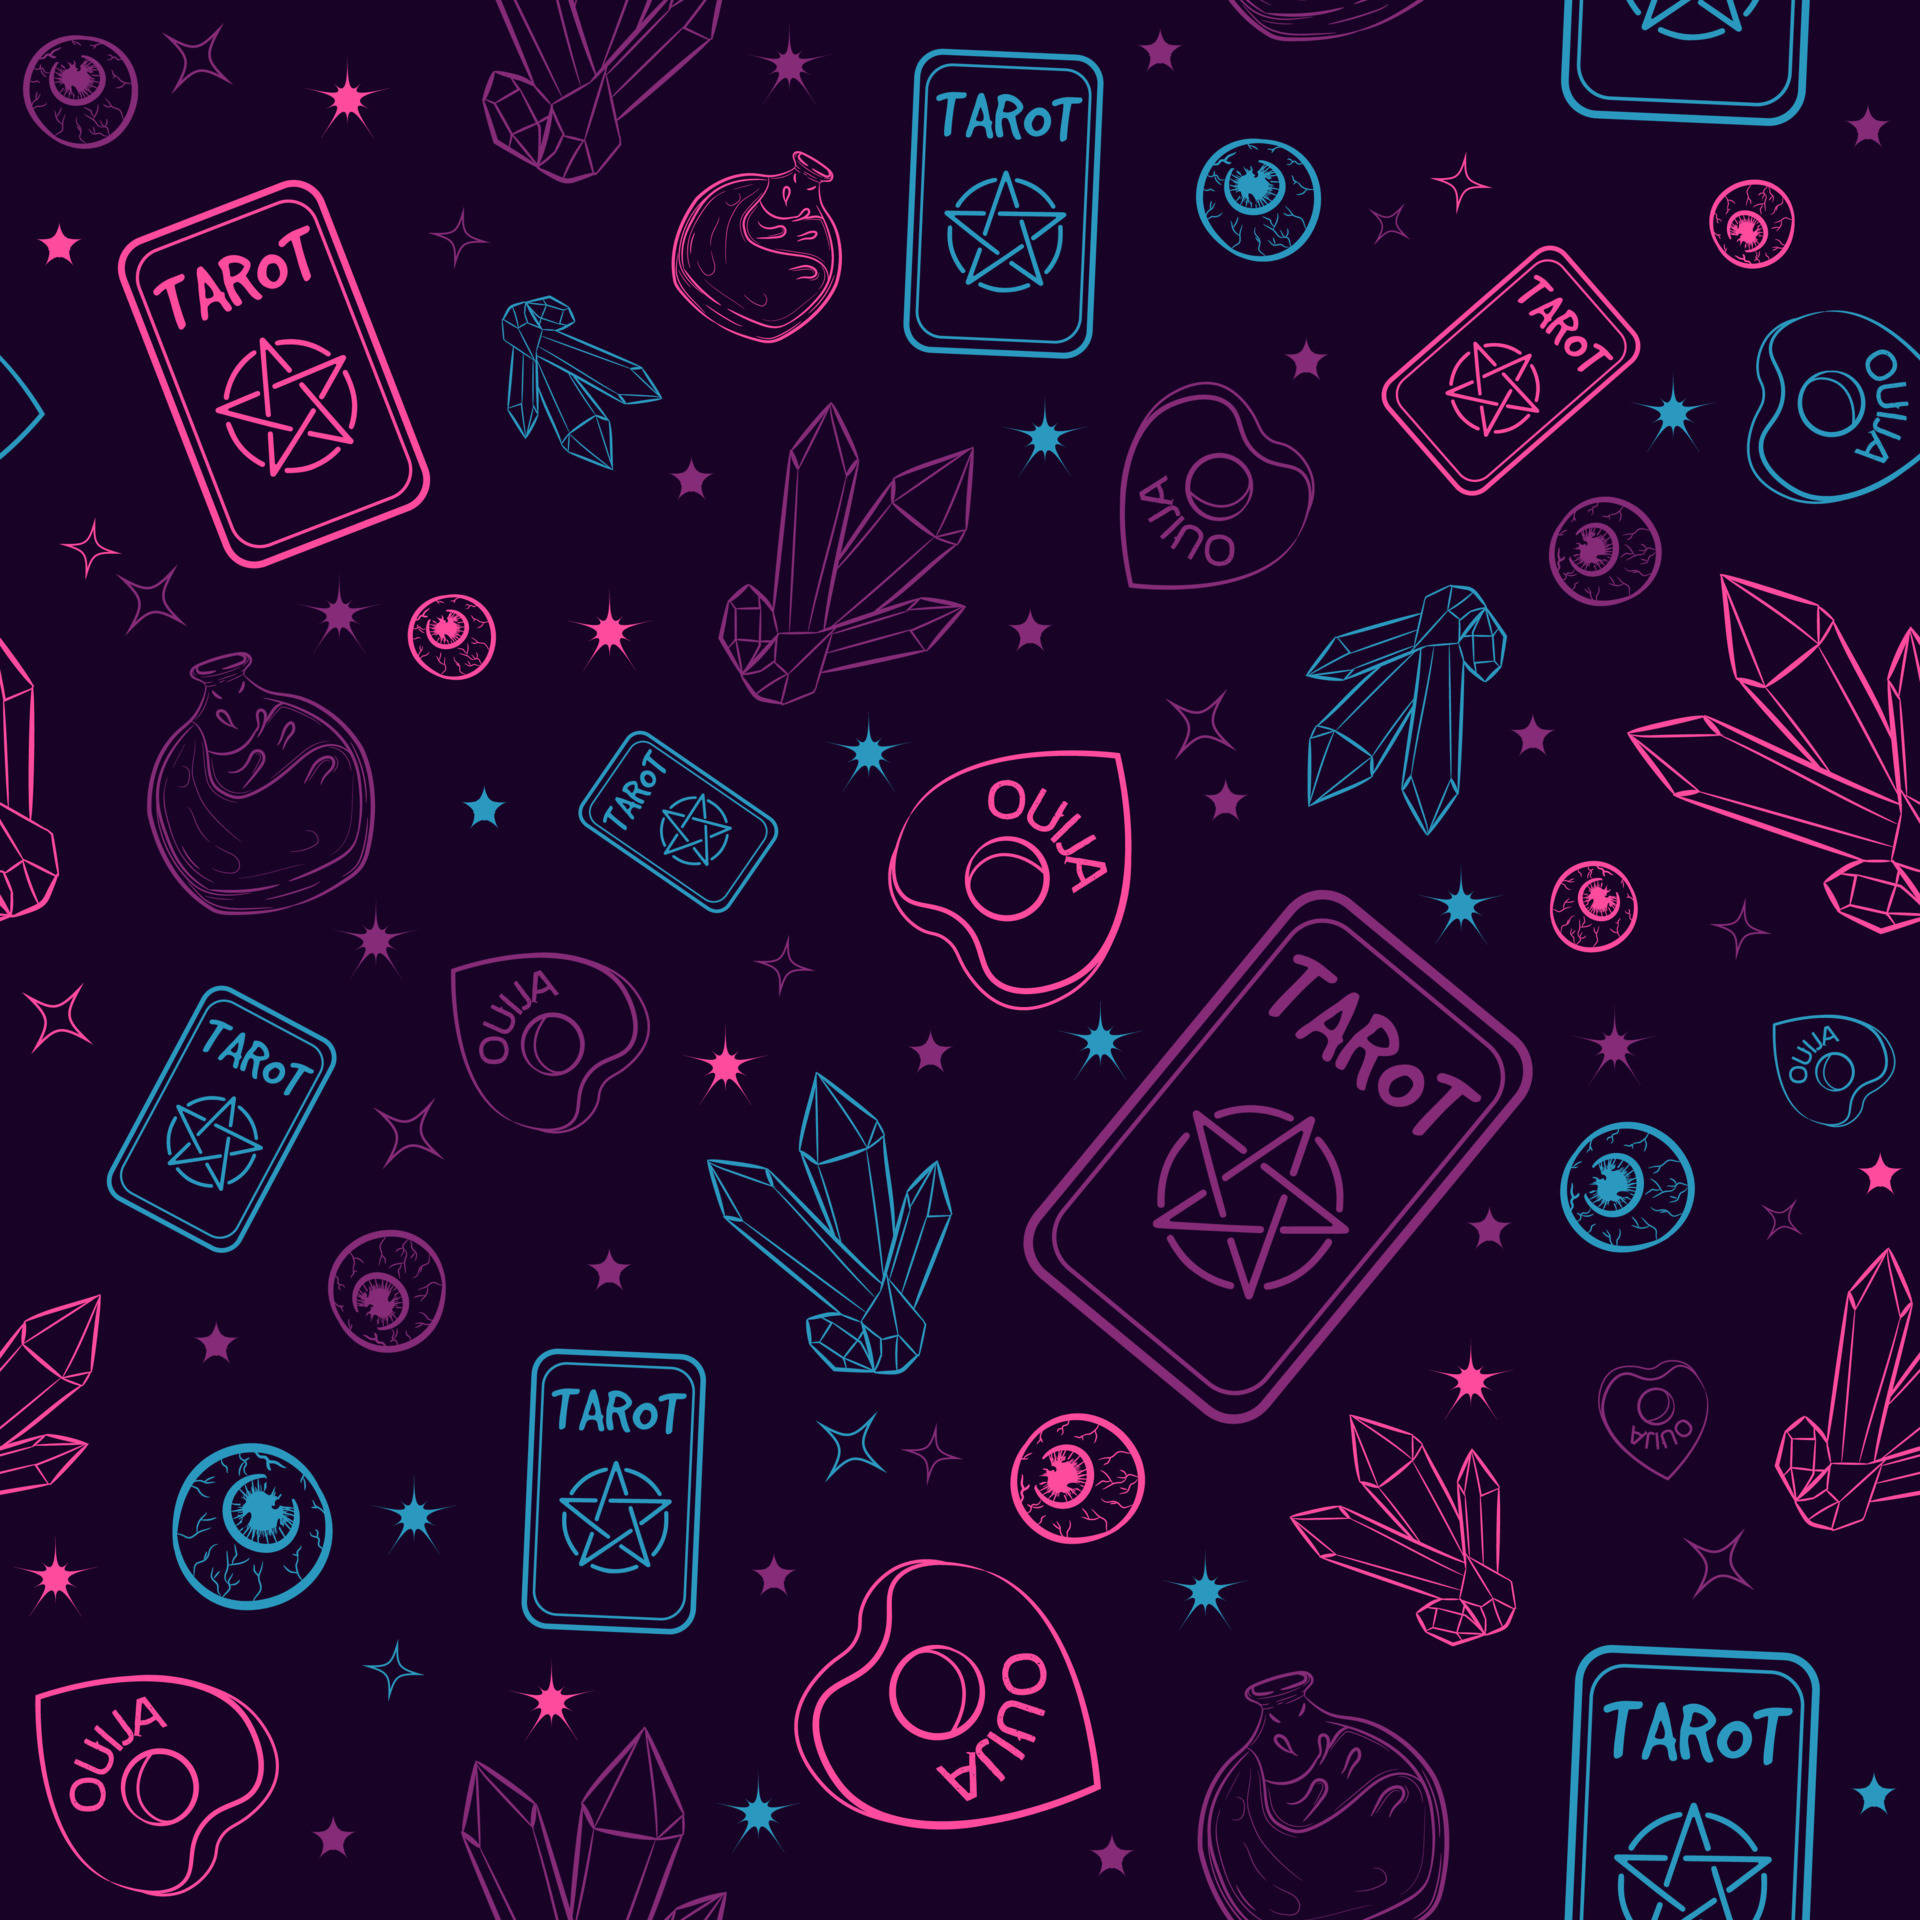 Tarot Cards, Planchettes, And Precious Crystals Wallpaper